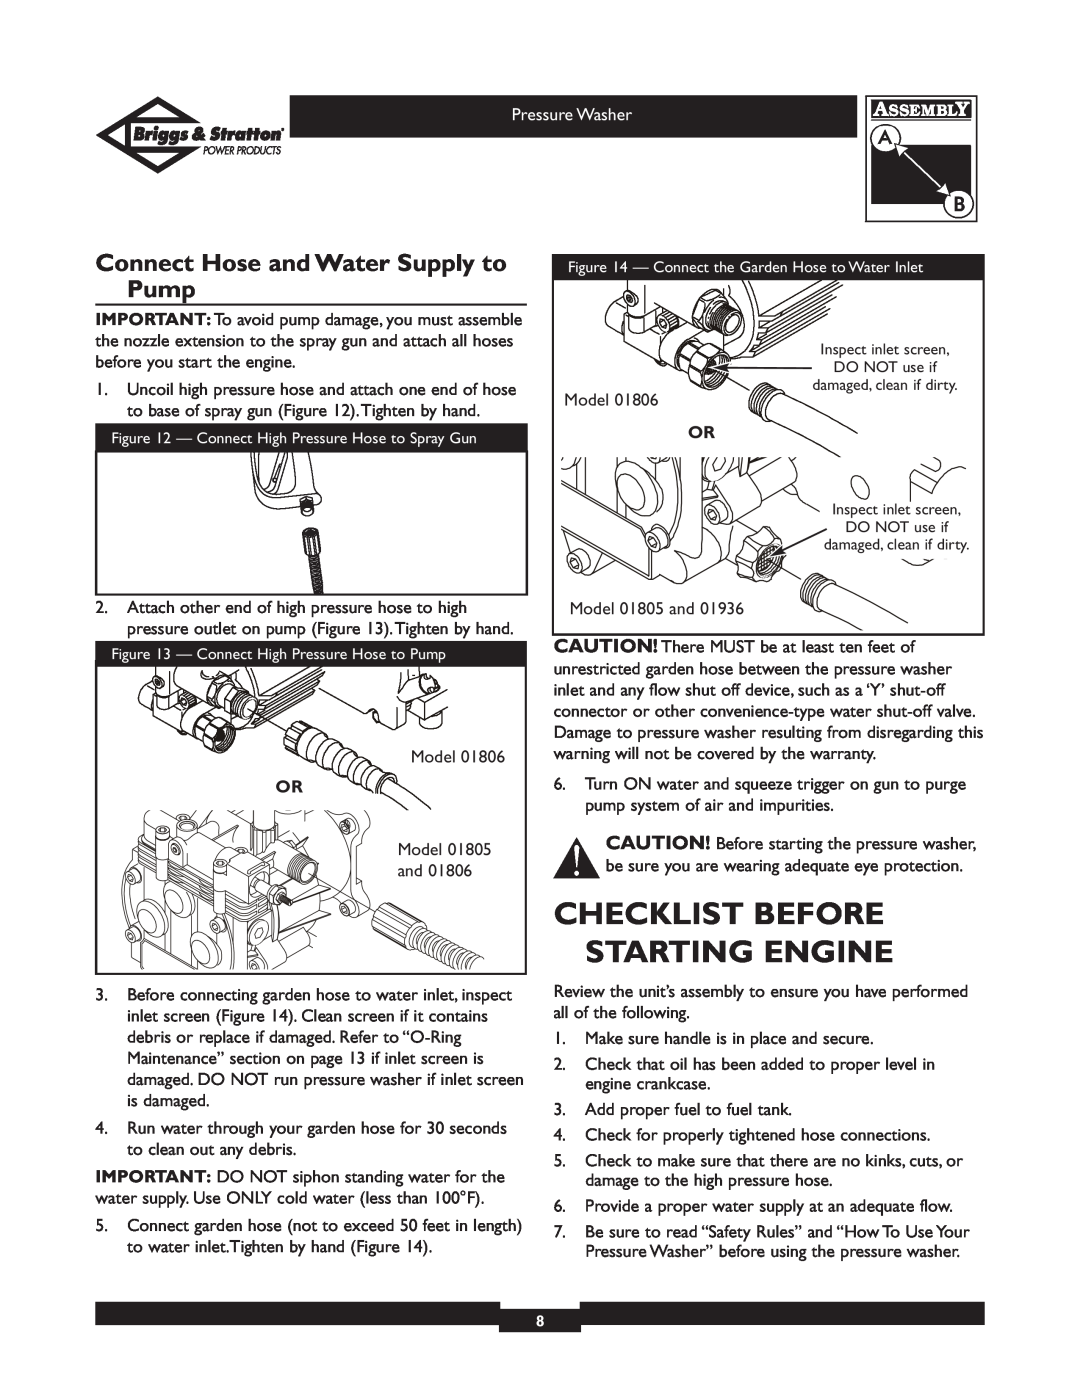 Briggs & Stratton 01805, 01806 Checklist Before Starting Engine, Connect Hose and Water Supply to Pump, Pressure Washer 